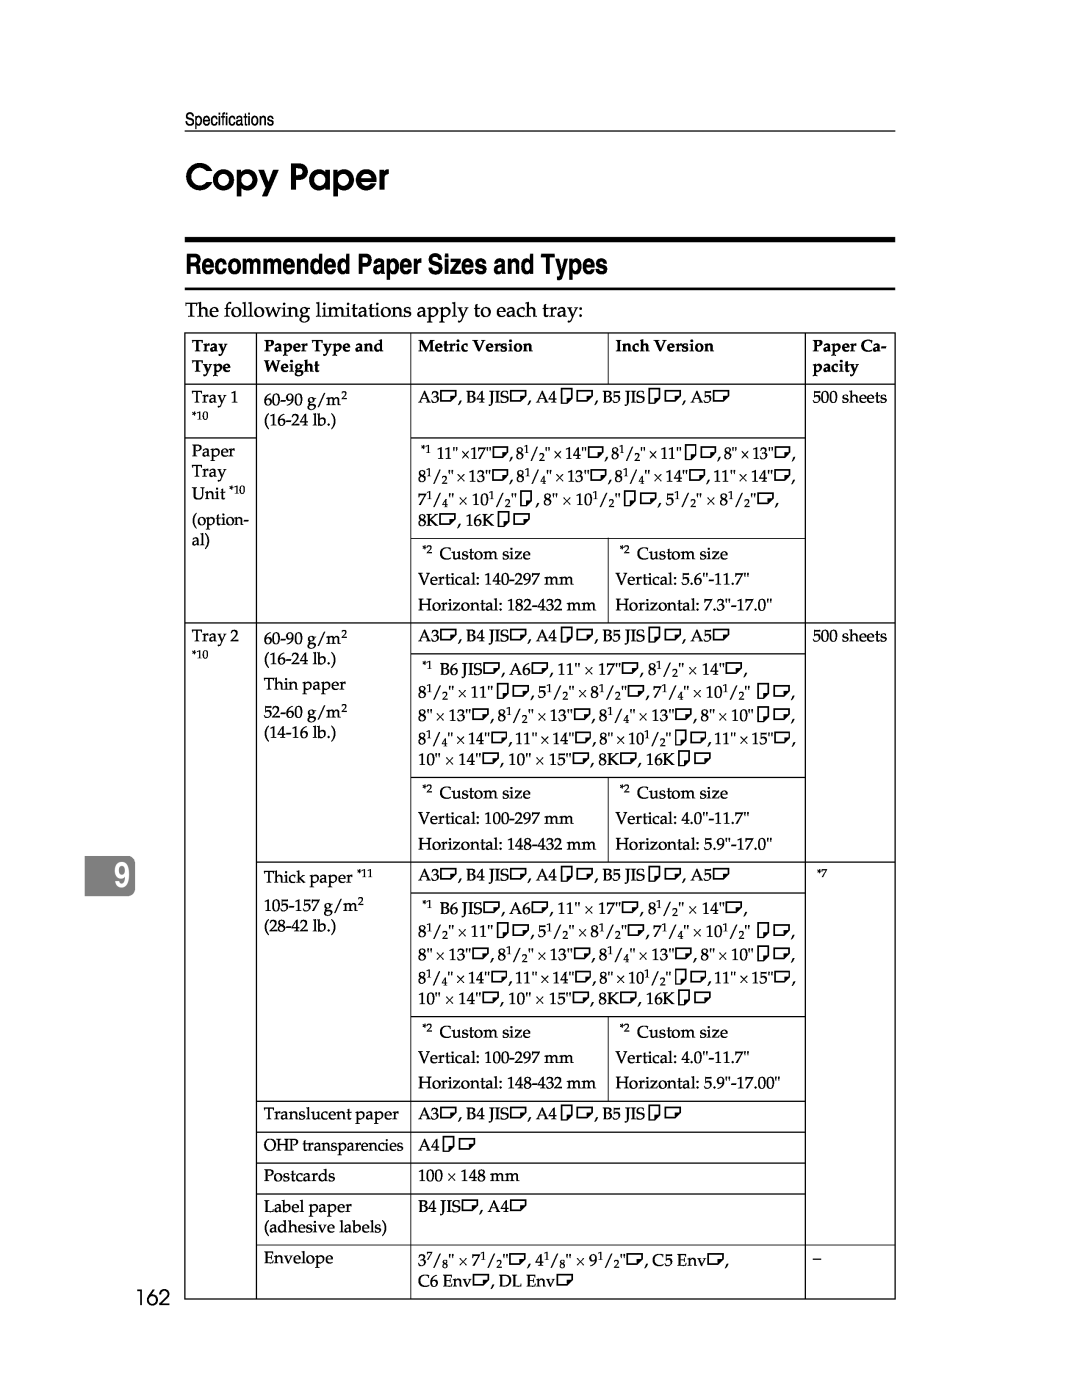 Lanier LD225 Copy Paper, Recommended Paper Sizes and Types, Tray, Paper Type and, Metric Version, Inch Version, Paper Ca 